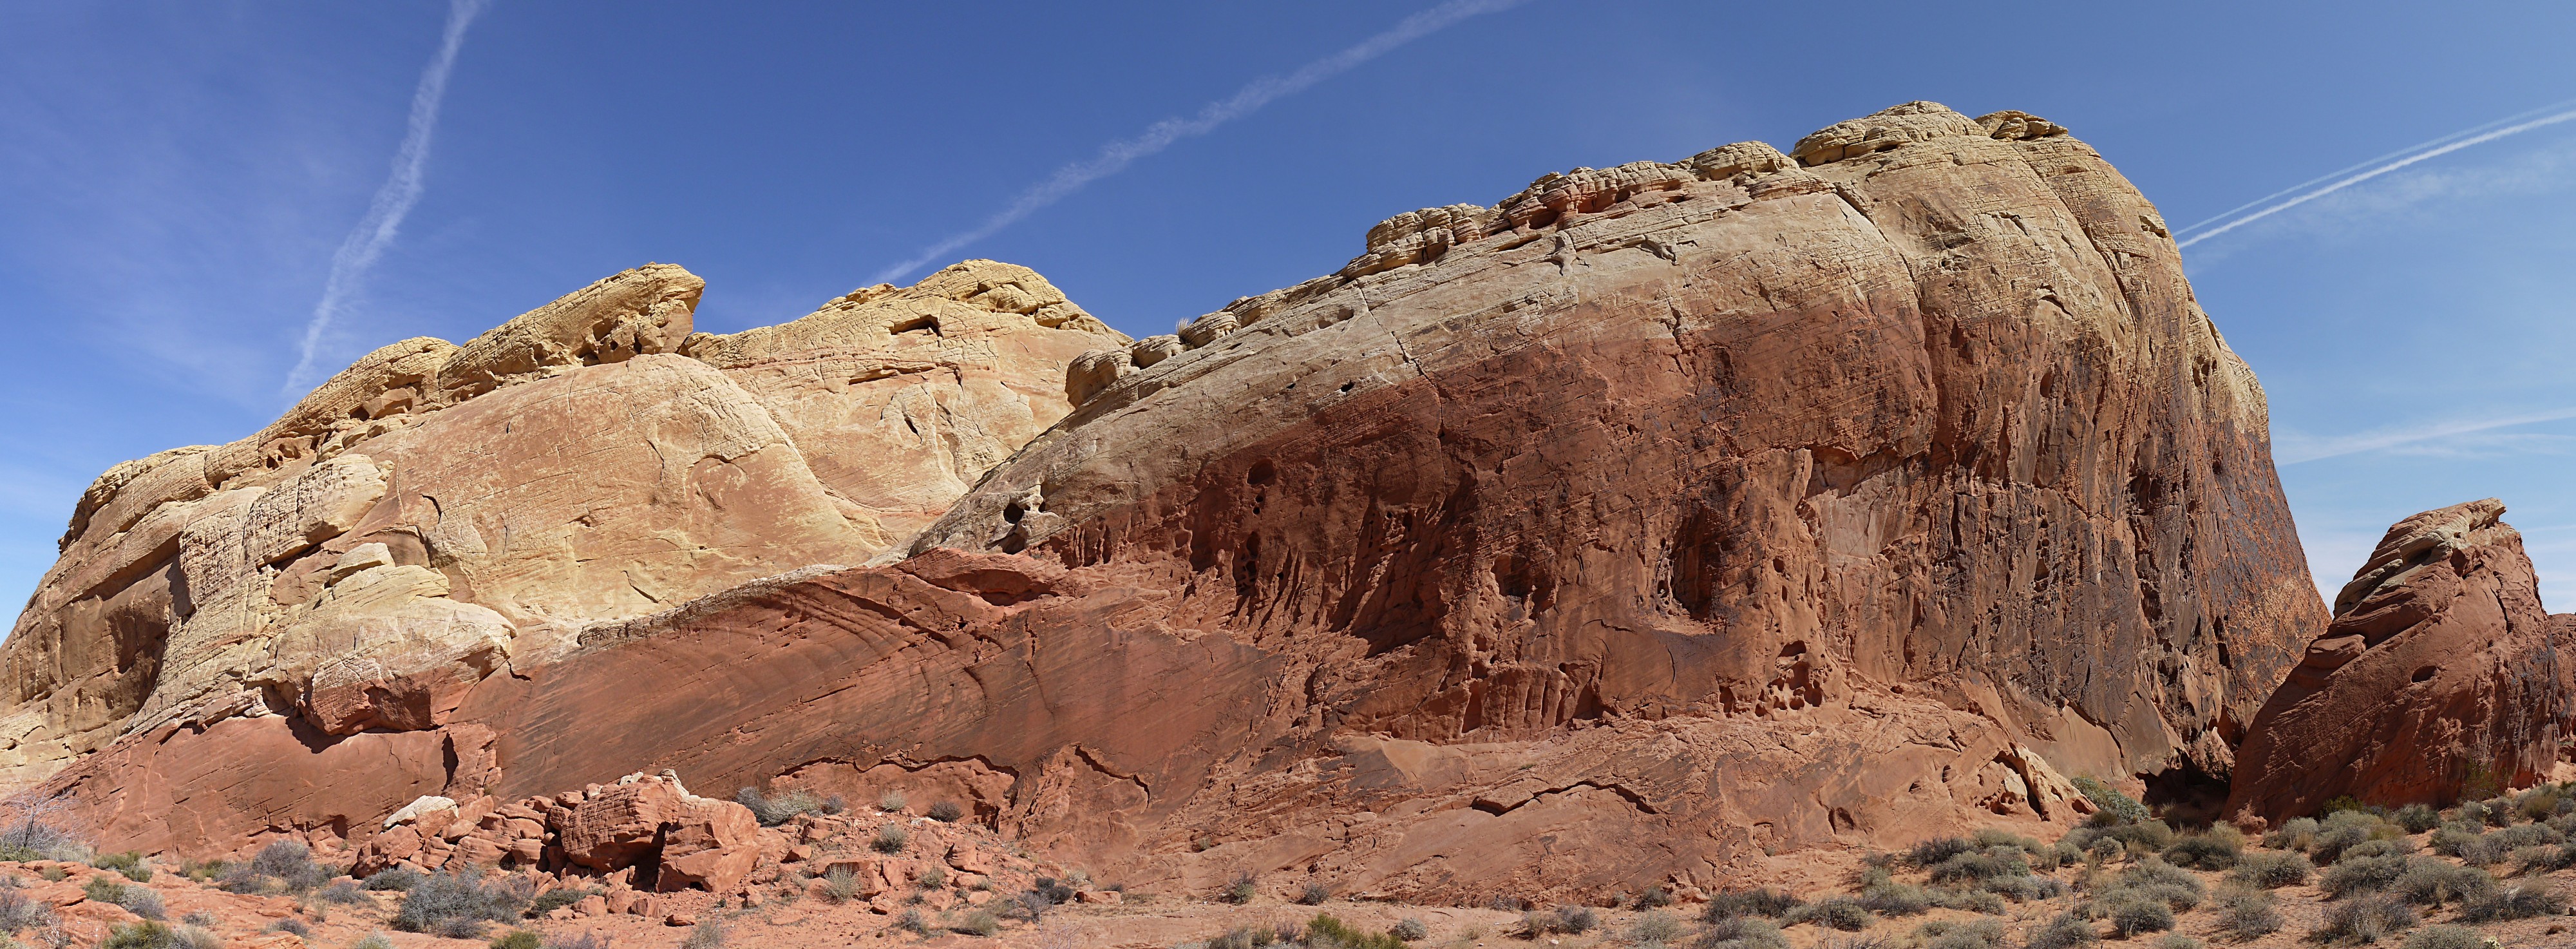 Bleached sandstone - Valley of Fire